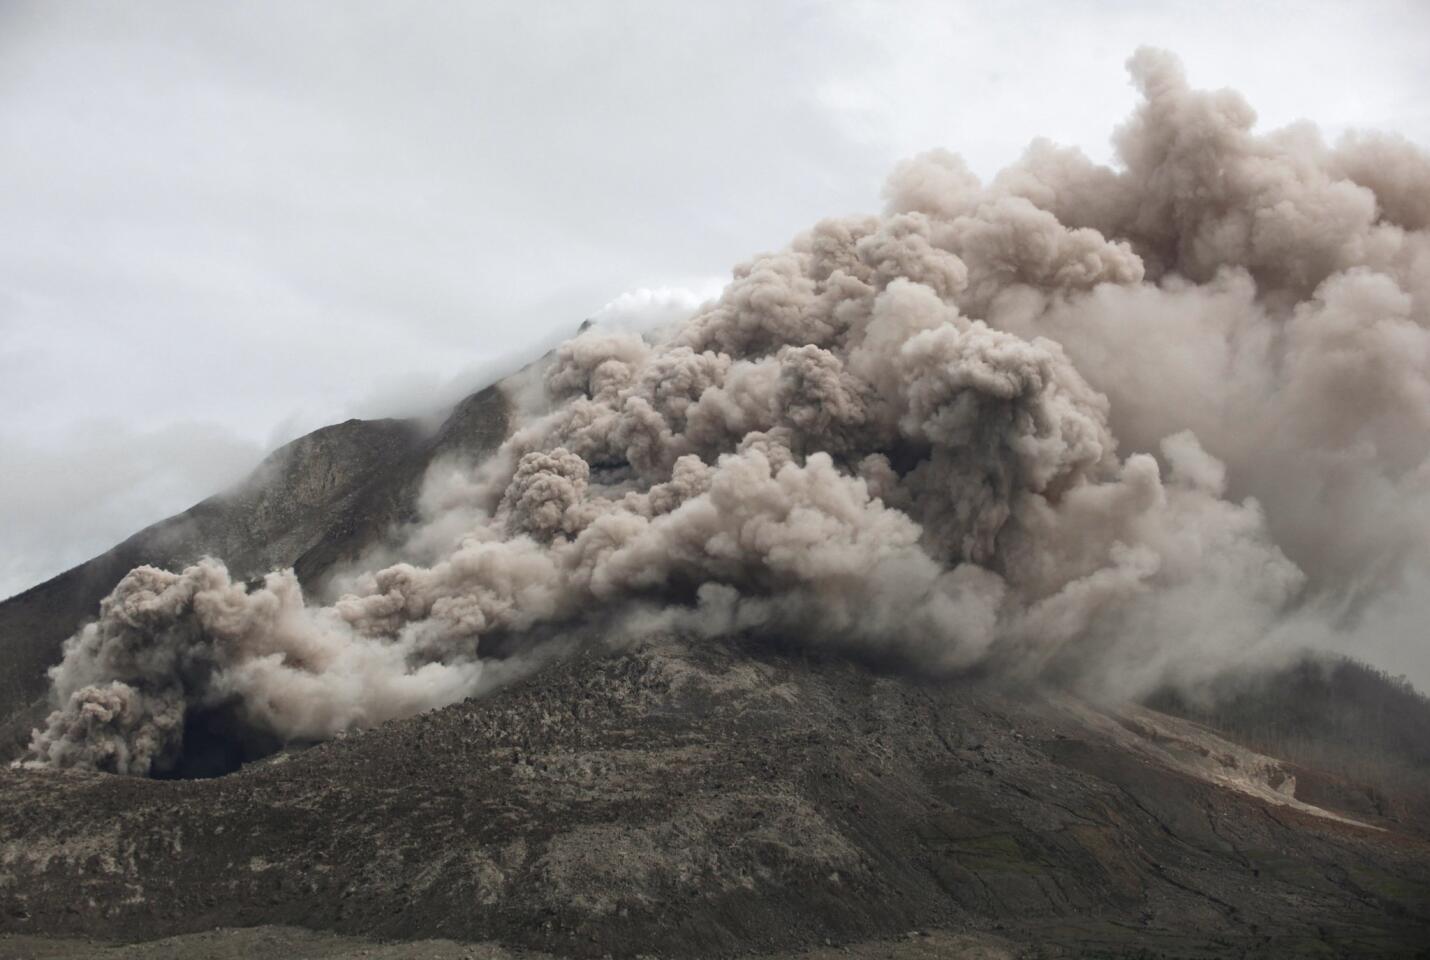 Mount Sinabung releases pyroclastic flows as seen from Tiga Serangkai, North Sumatra, Indonesia on Friday, June 12, 2015. The volcano has sporadically erupted since 2010 after being dormant for 400 years.